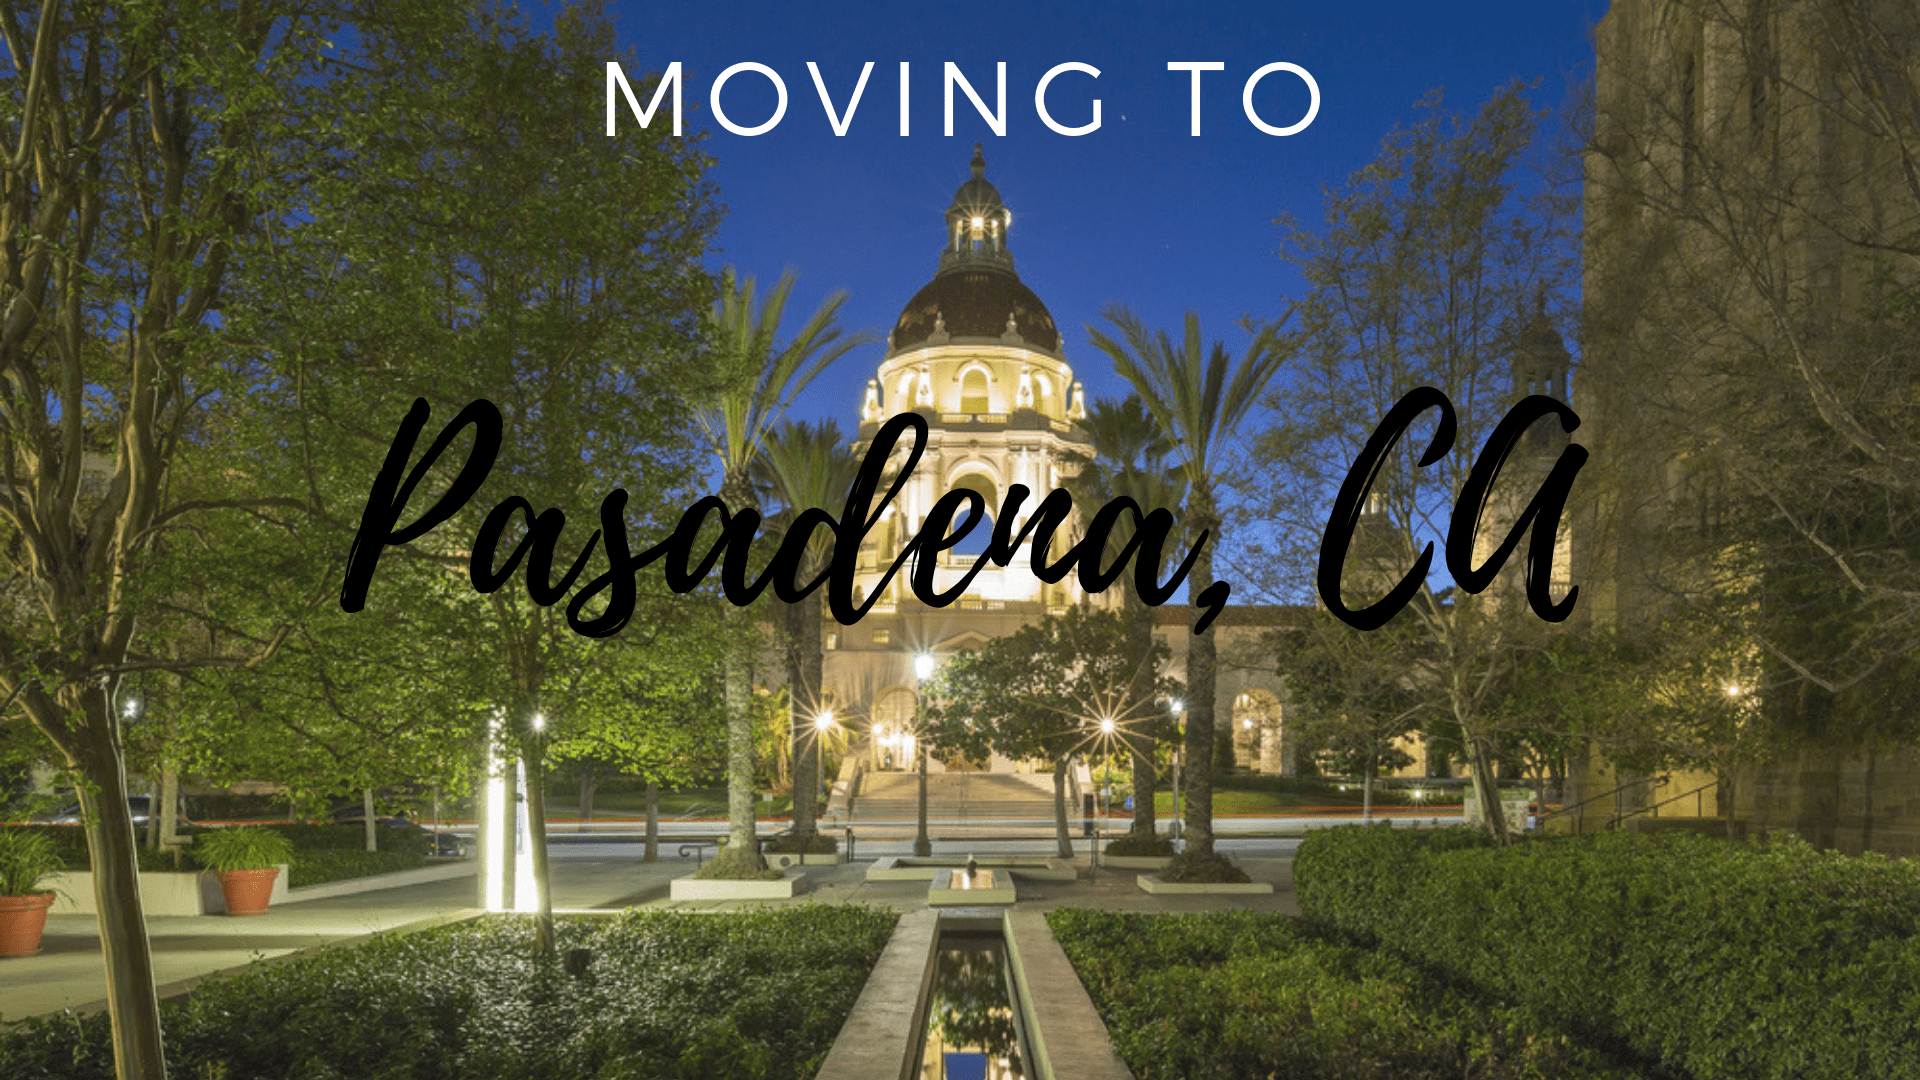 Moving to Pasadena - The Complete Guide to Living Here!